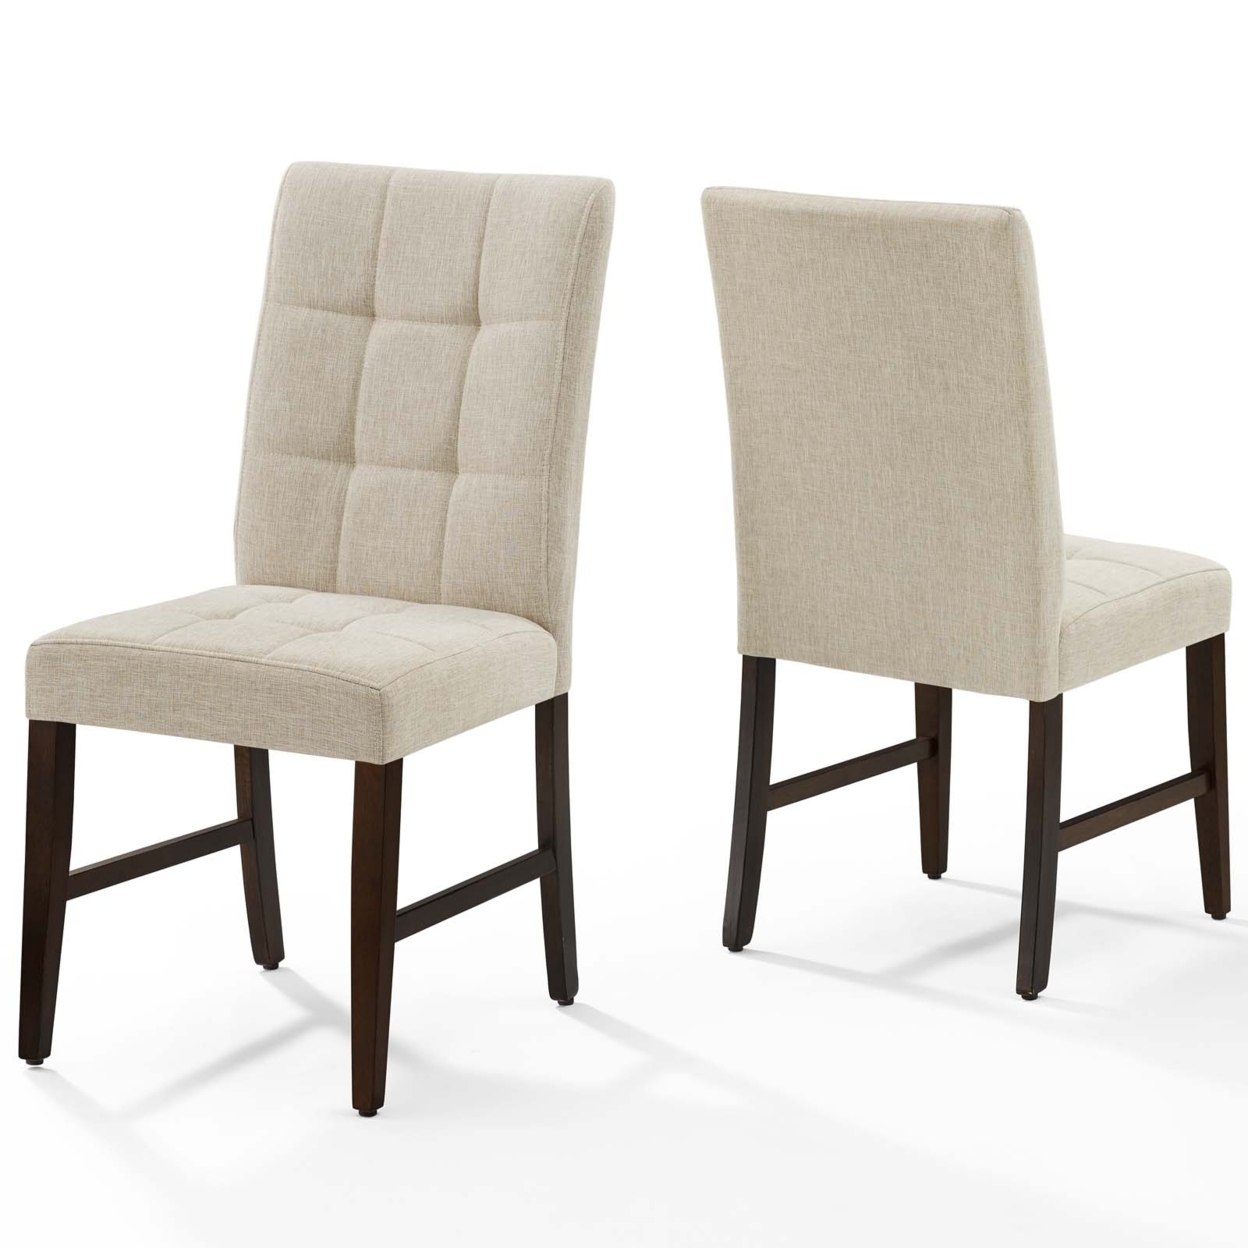 Promulgate Biscuit Tufted Upholstered Fabric Dining Chair Set Of 2,Beige